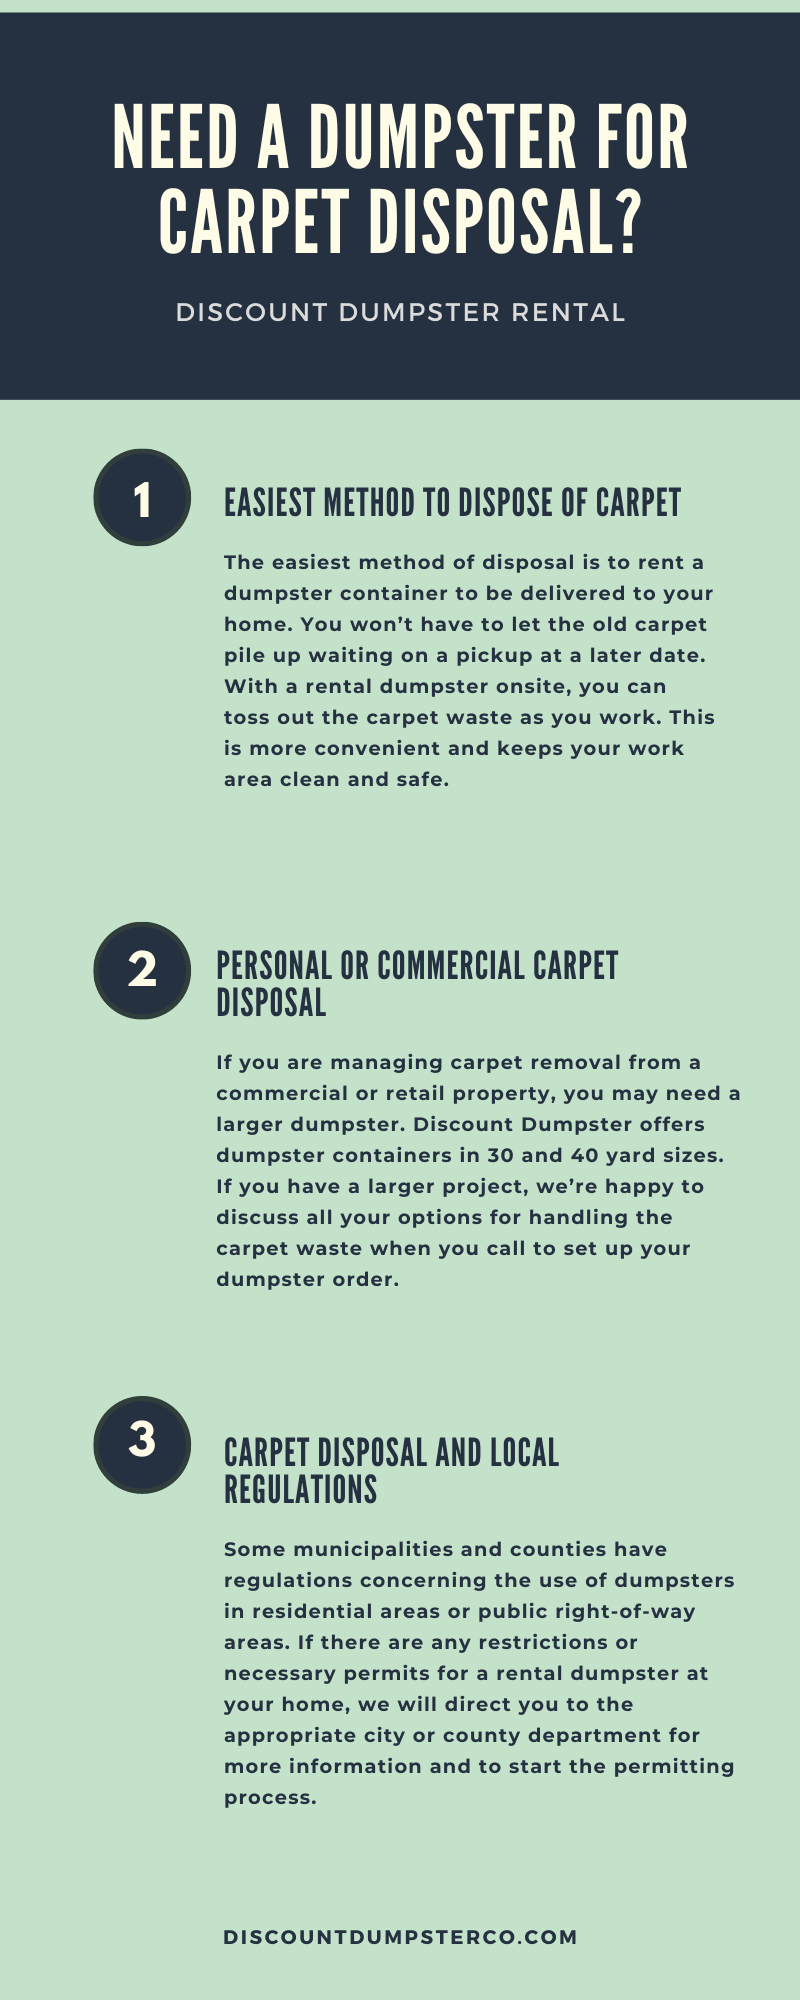 https://discountdumpsterco.com/wp-content/uploads/how-to-dispose-of-carpet-infographic-2-1.png